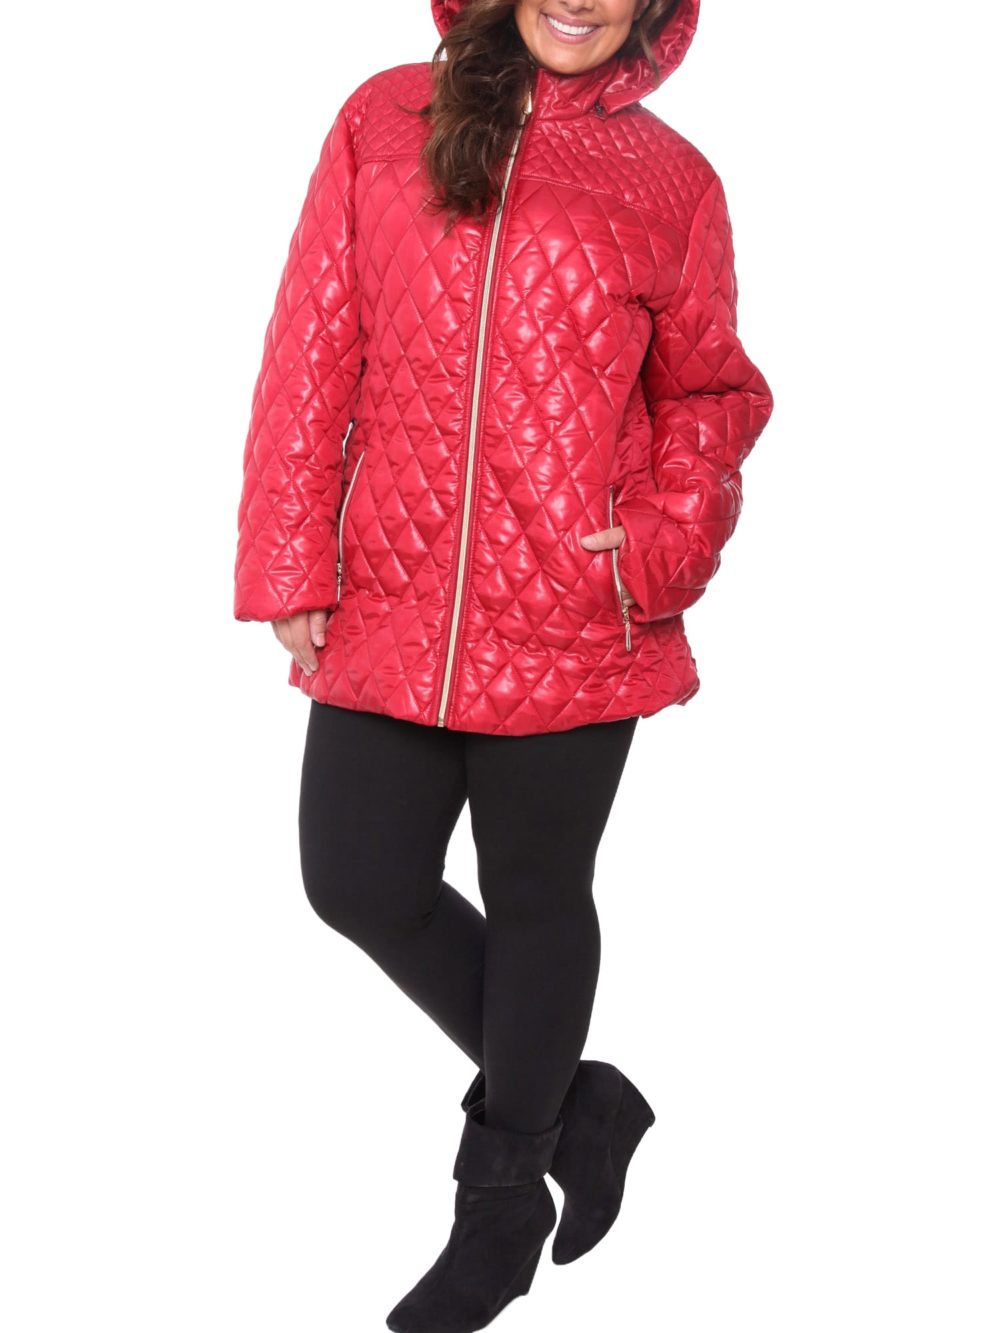 woocommerce-673321-2209615.cloudwaysapps.com-white-mark-womens-plus-size-red-quilted-puffer-coat-jacket